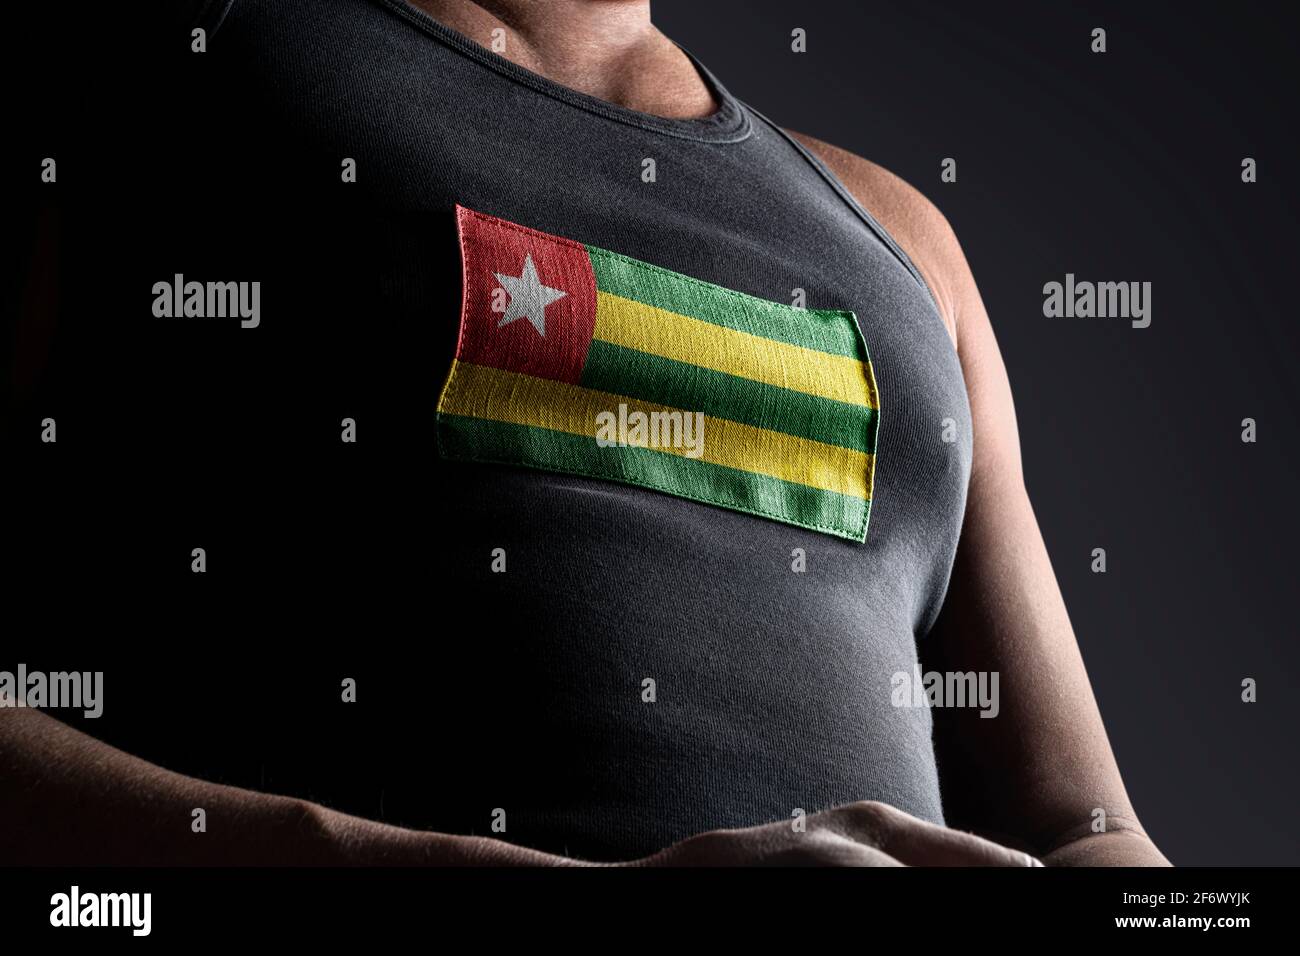 The national flag of Togo on the athlete's chest Stock Photo